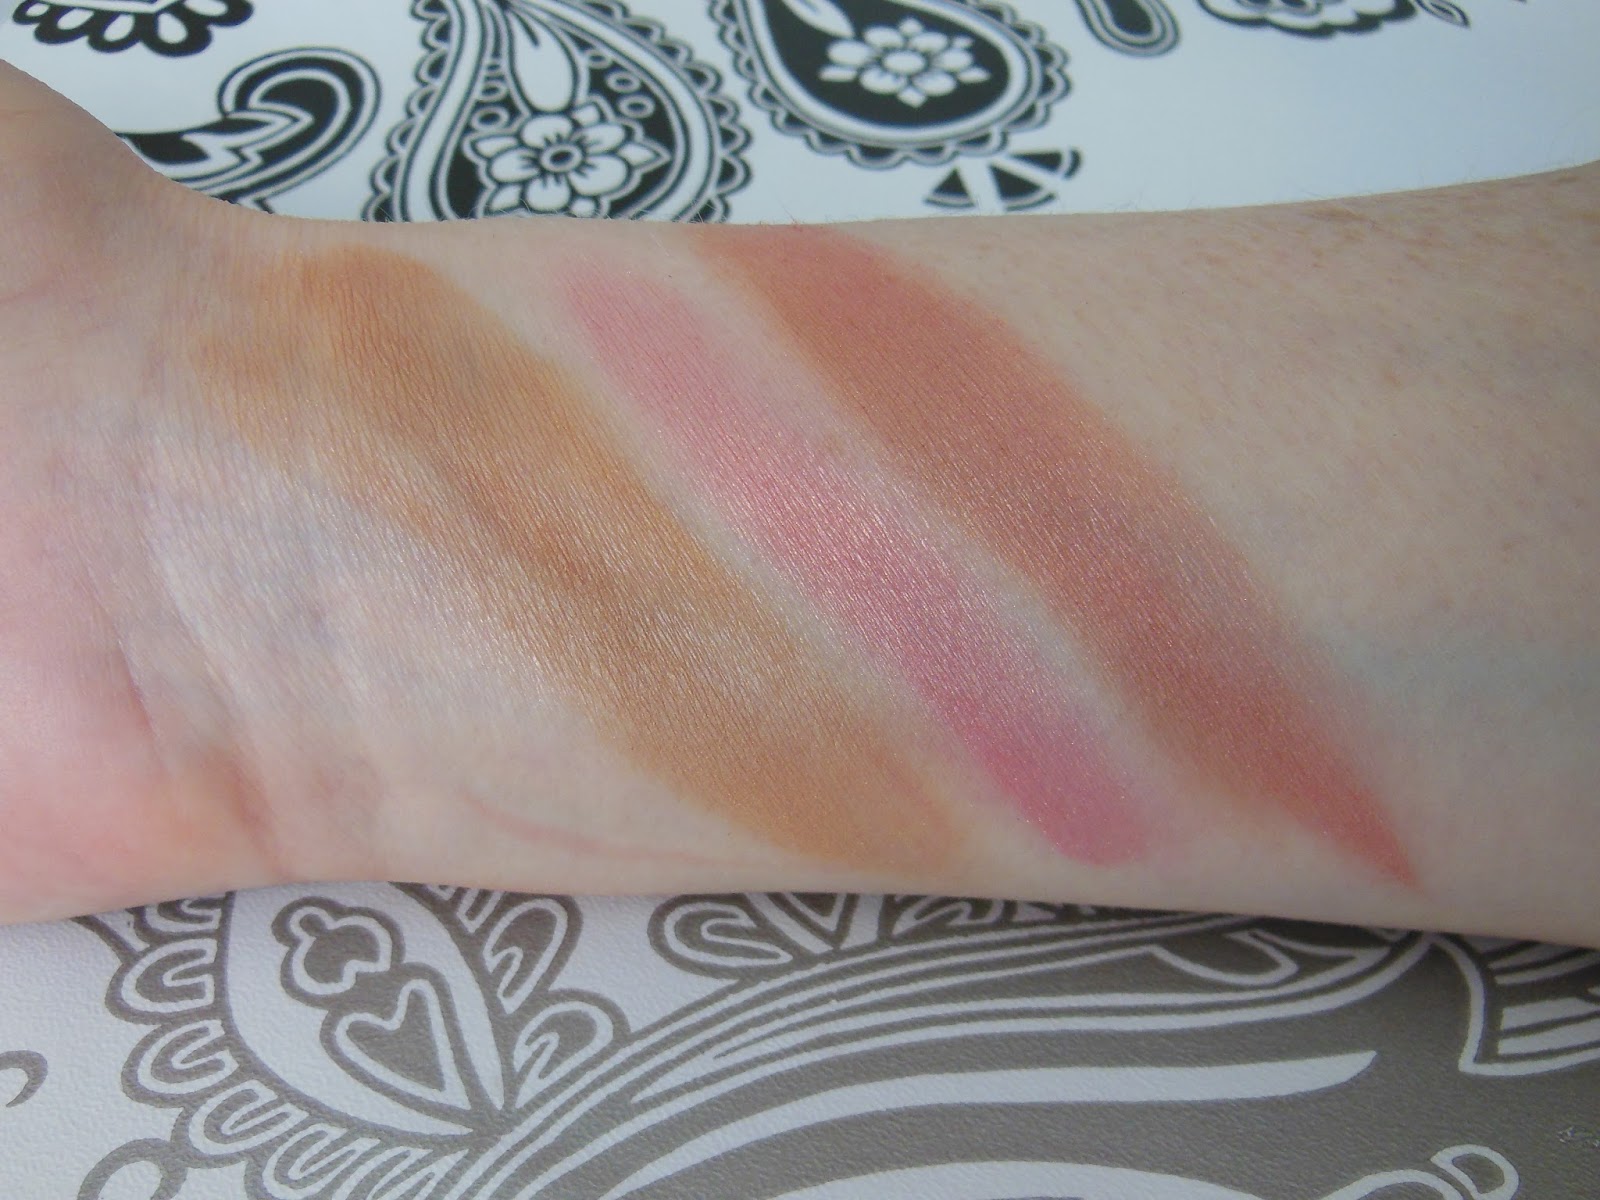 Kiko life in rio collection sun lovers blusher and bronzer swatches